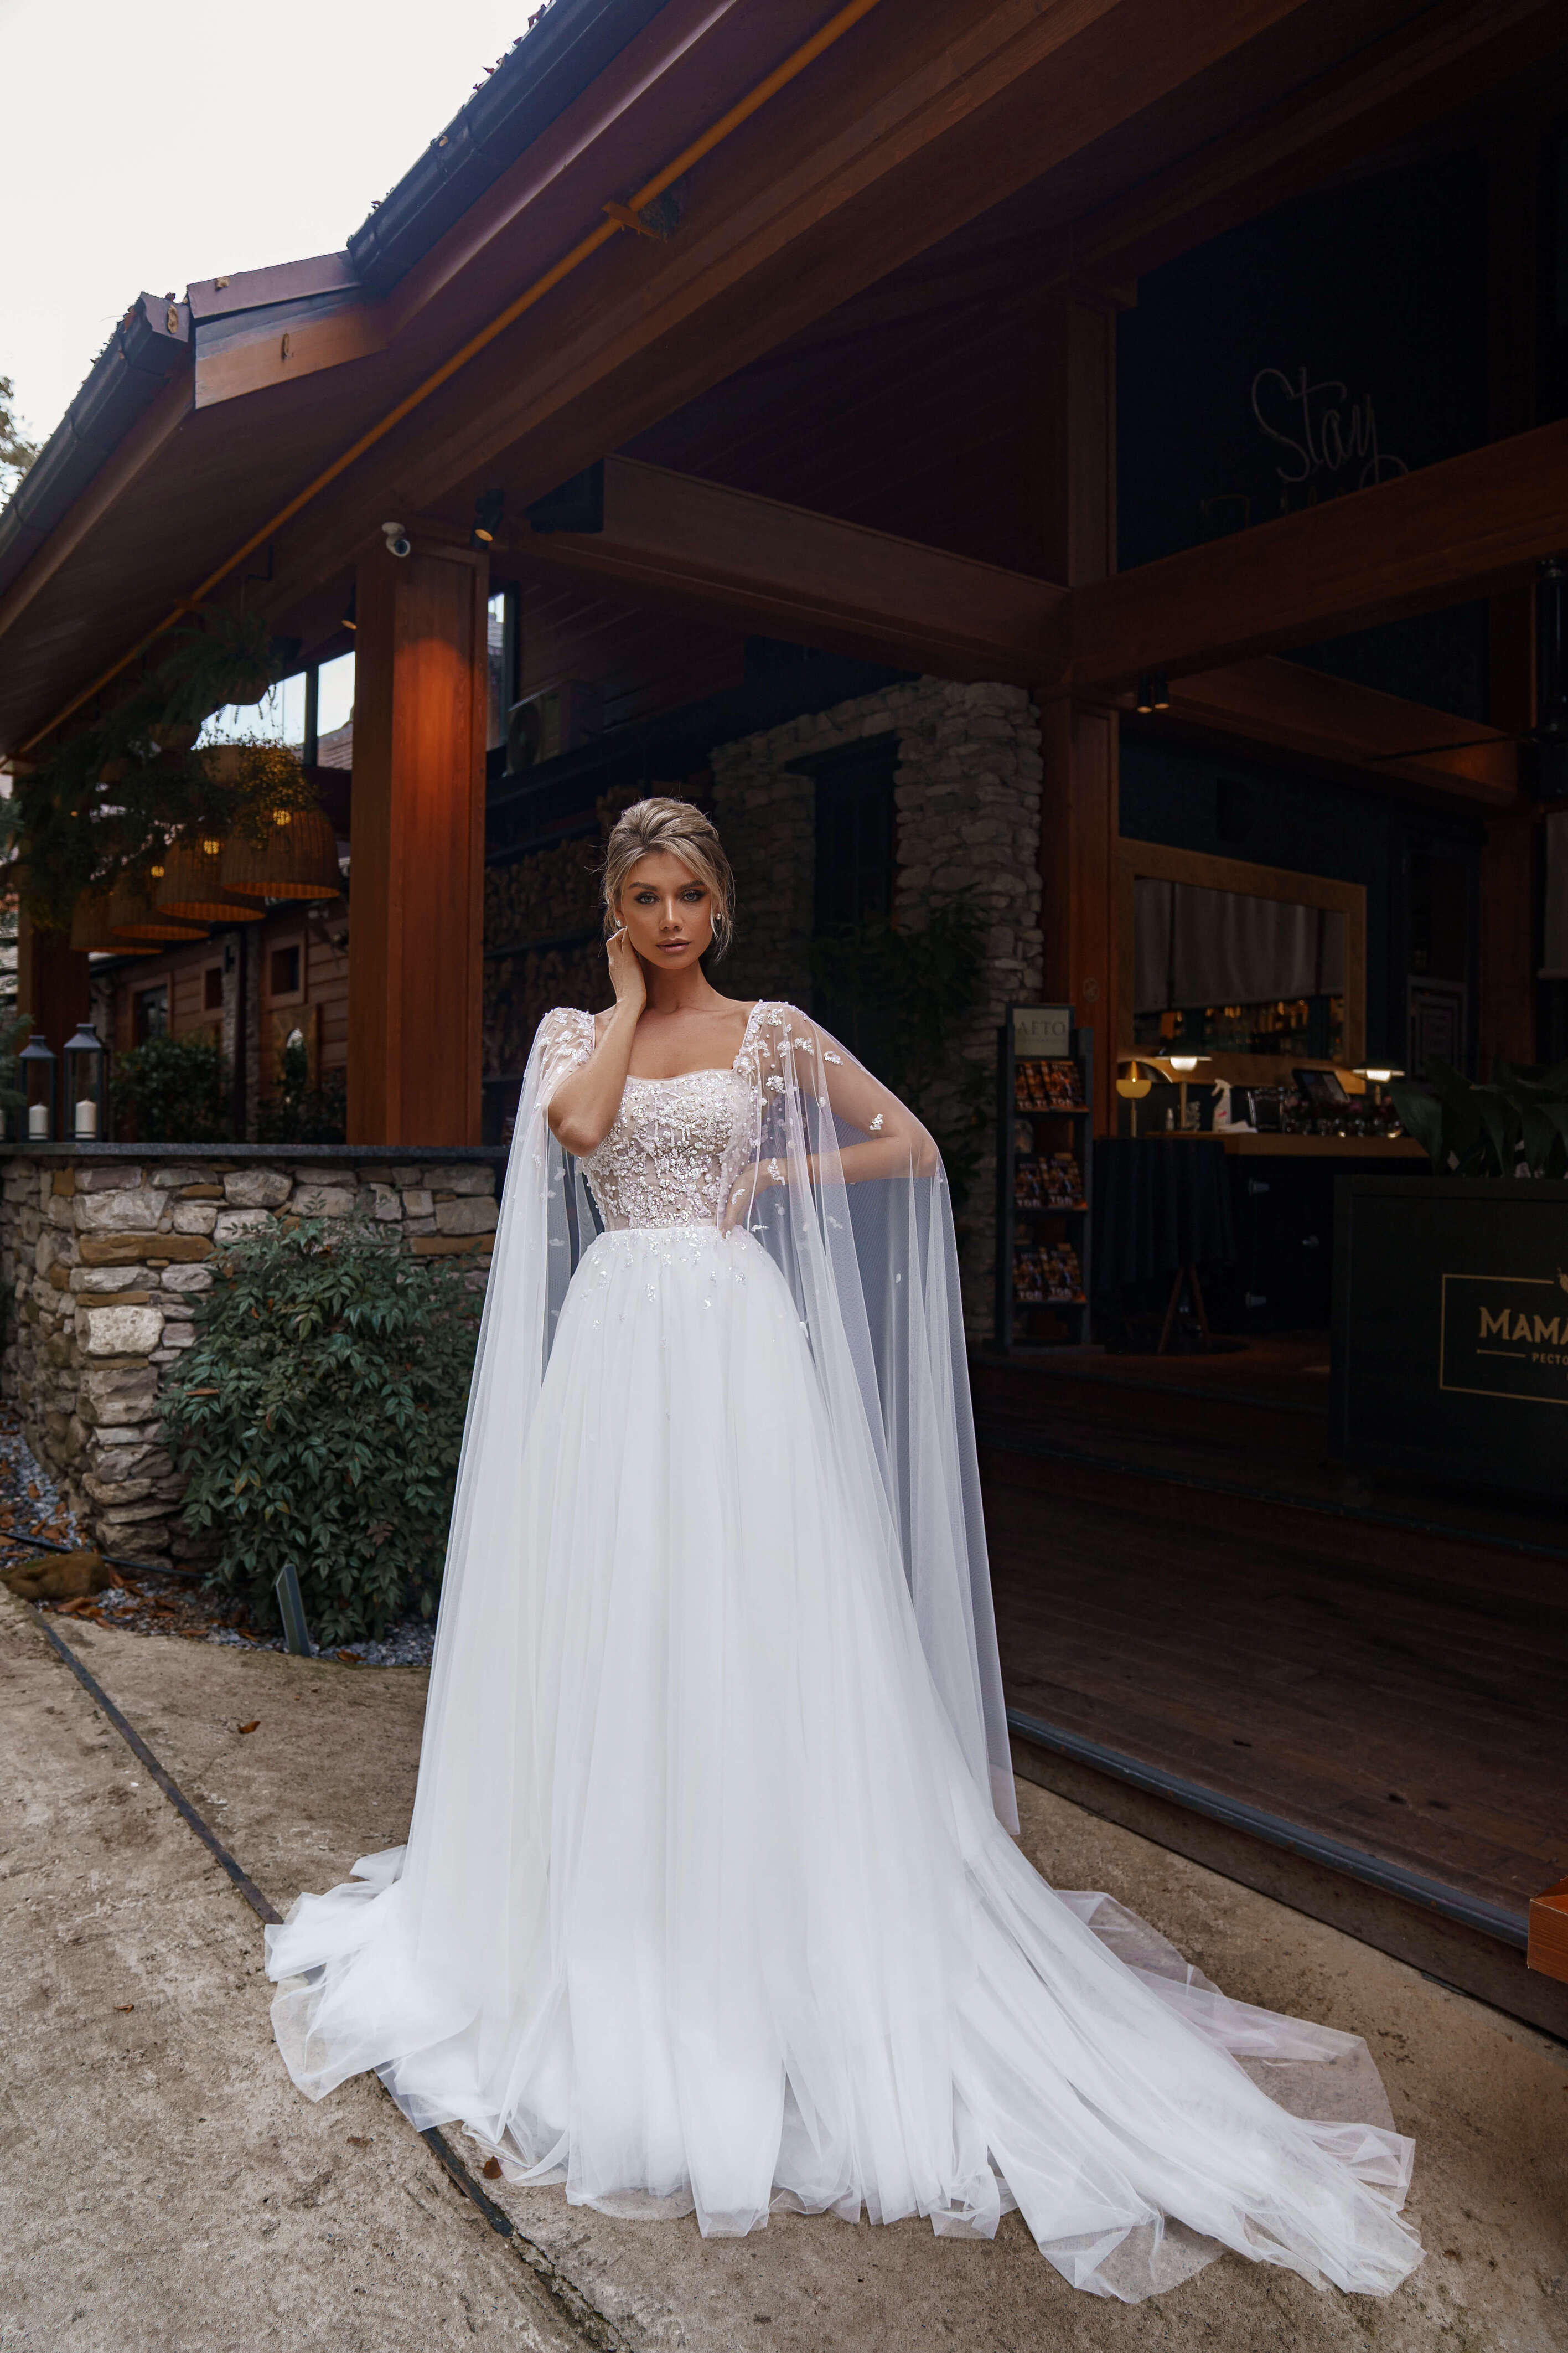 A-Line Wedding Dress with Open Shoulders & Long Wing Sleeves Sonesta Kais